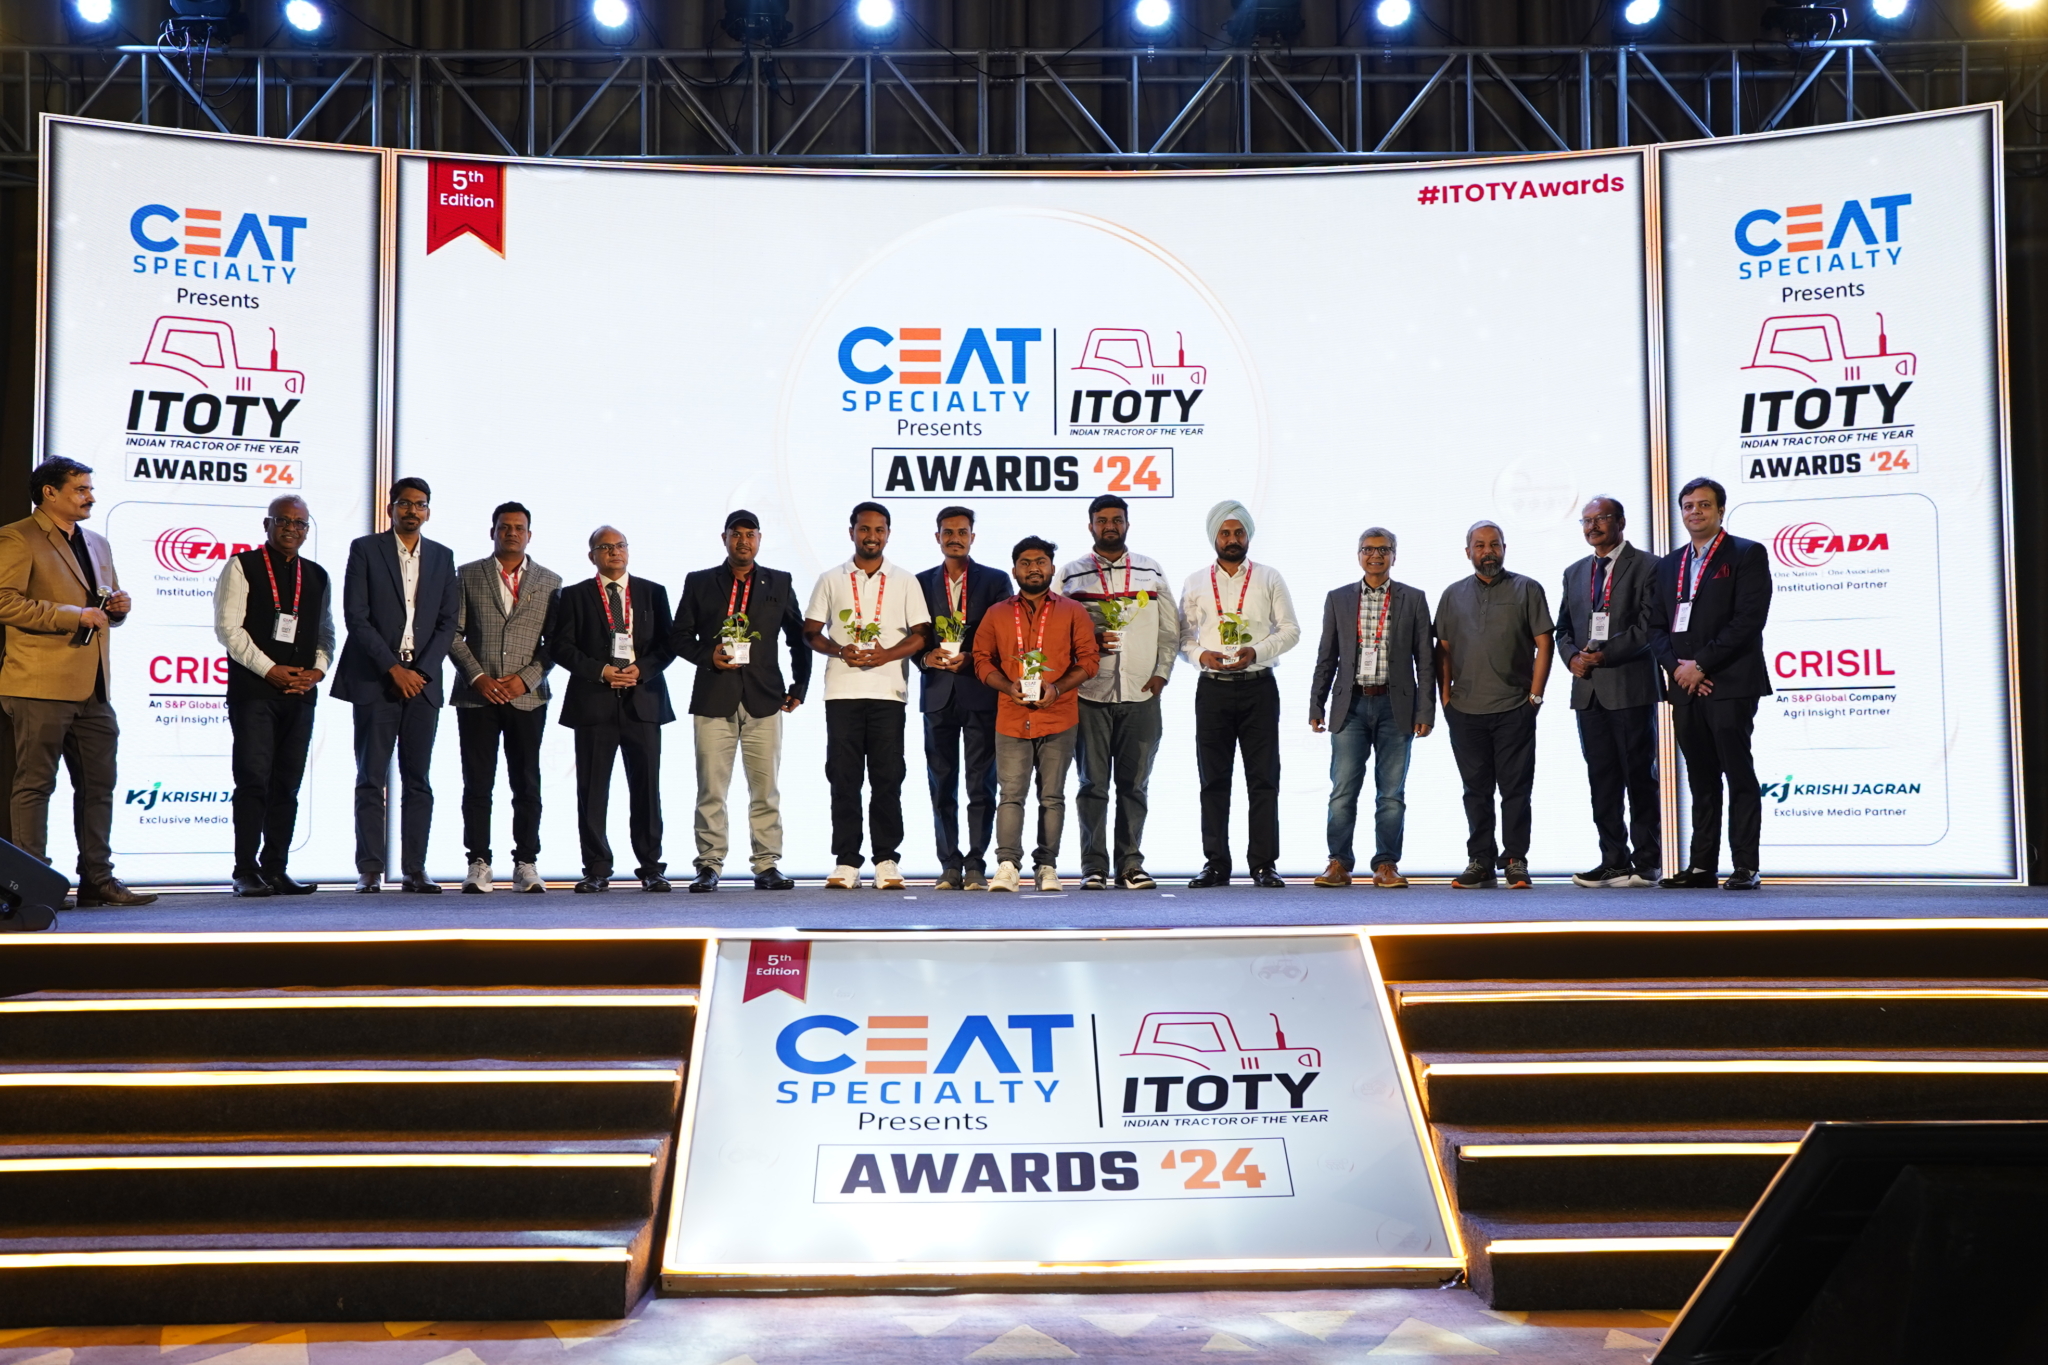 CEAT Specialty Presents fifth ITOTY Awards in India